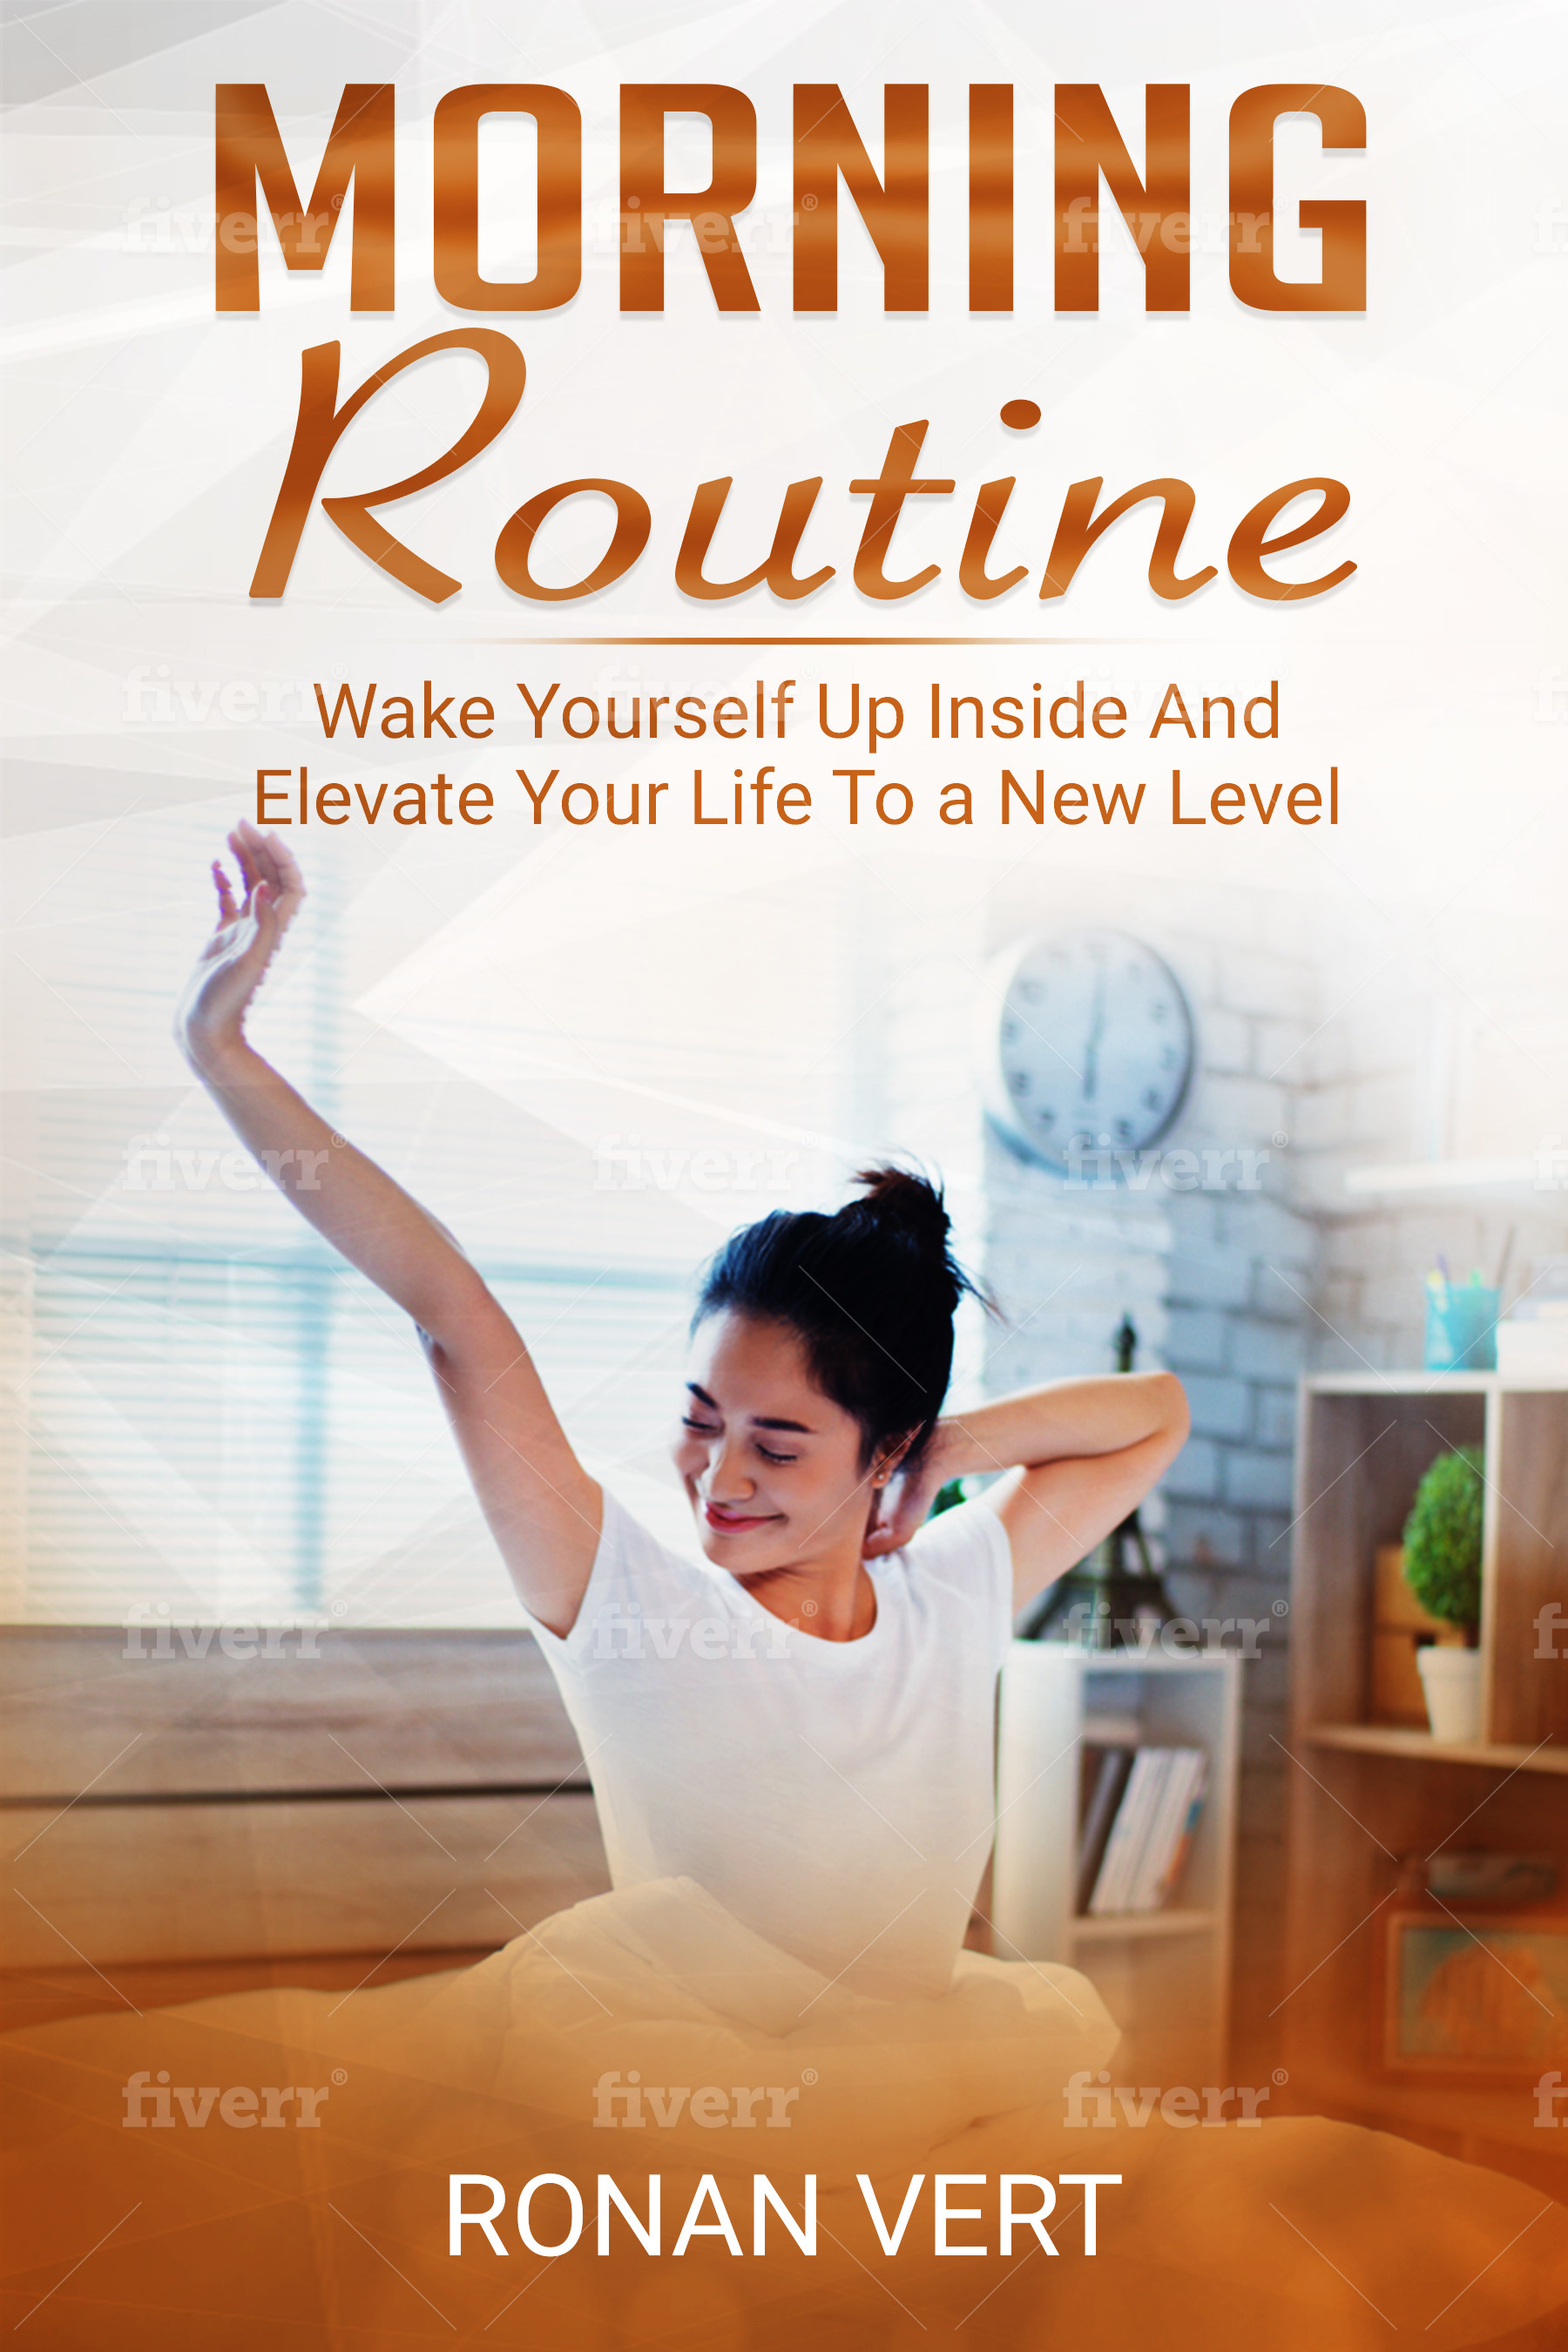 FREE: Morning Routine: Wake Yourself Up Inside and Elevate Your Life to a New Level by Ronan Vert